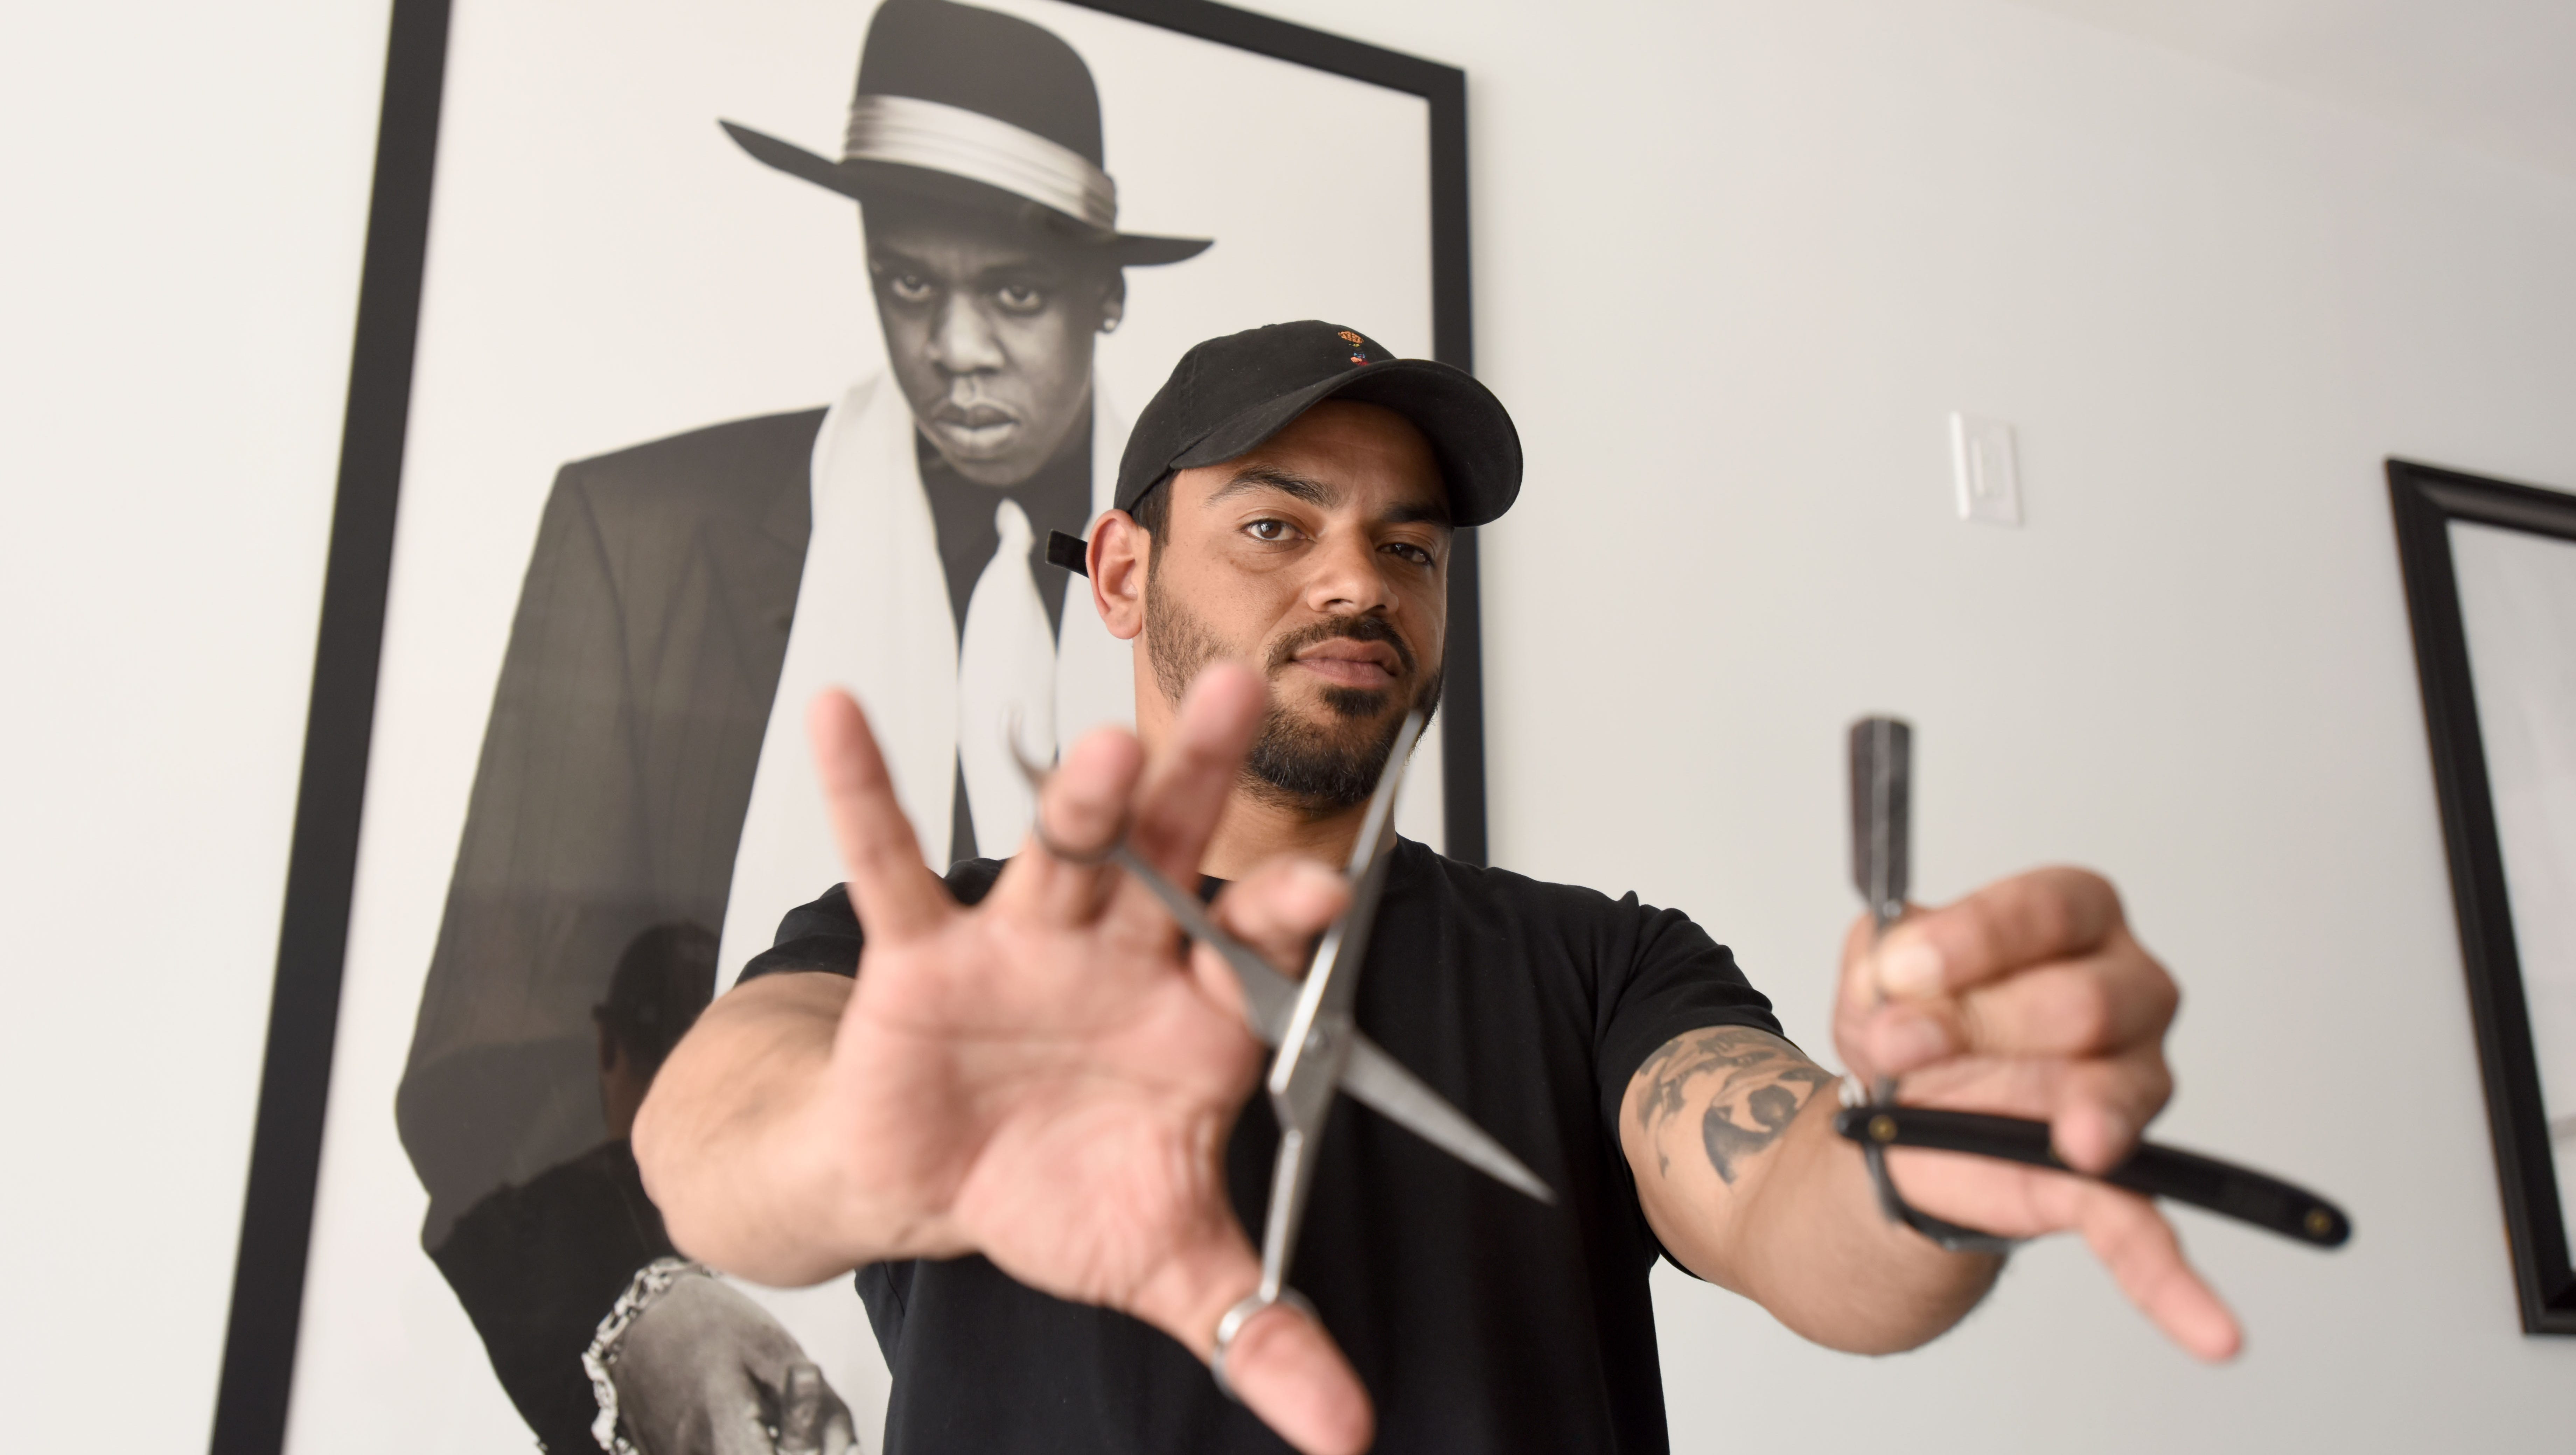 This Englewood barber flies to wherever Jay Z is every week to cut his hair